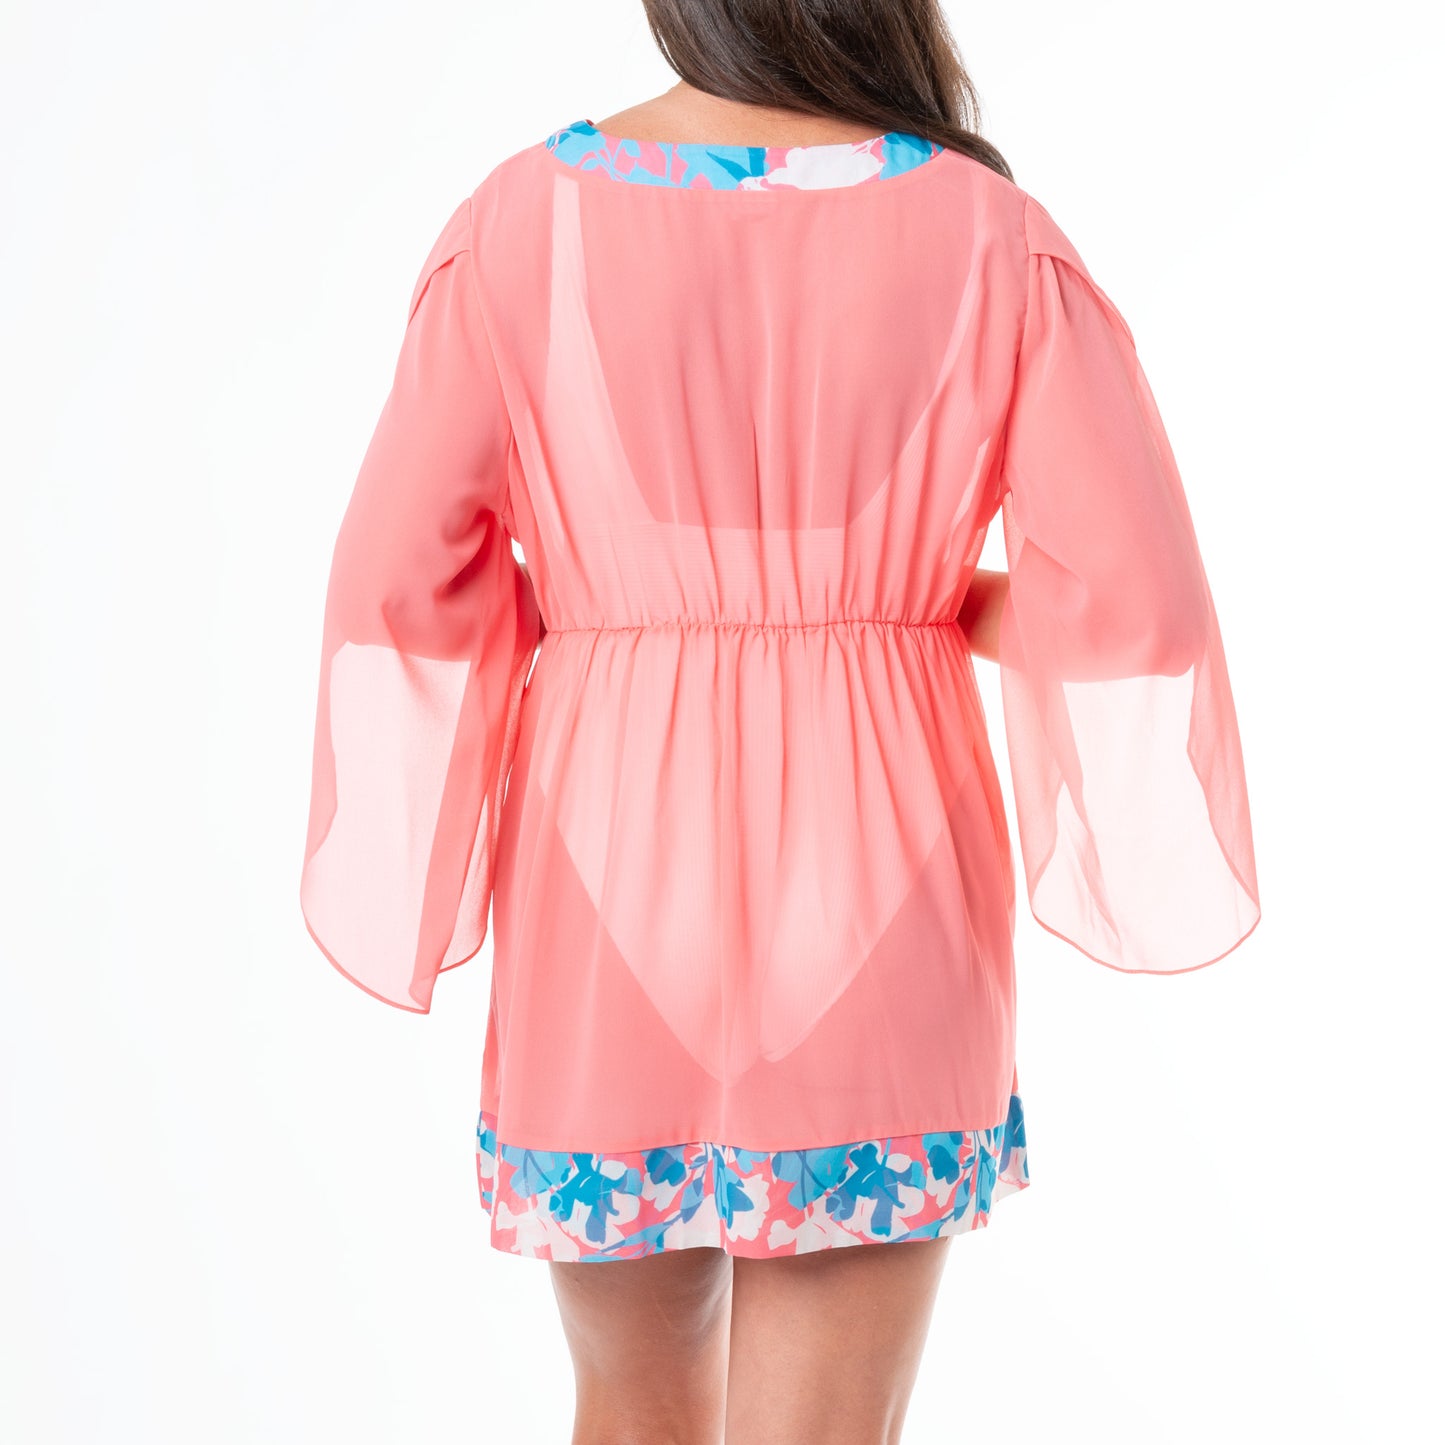 Alyssa Long Sleeve Swimsuit Cover Up